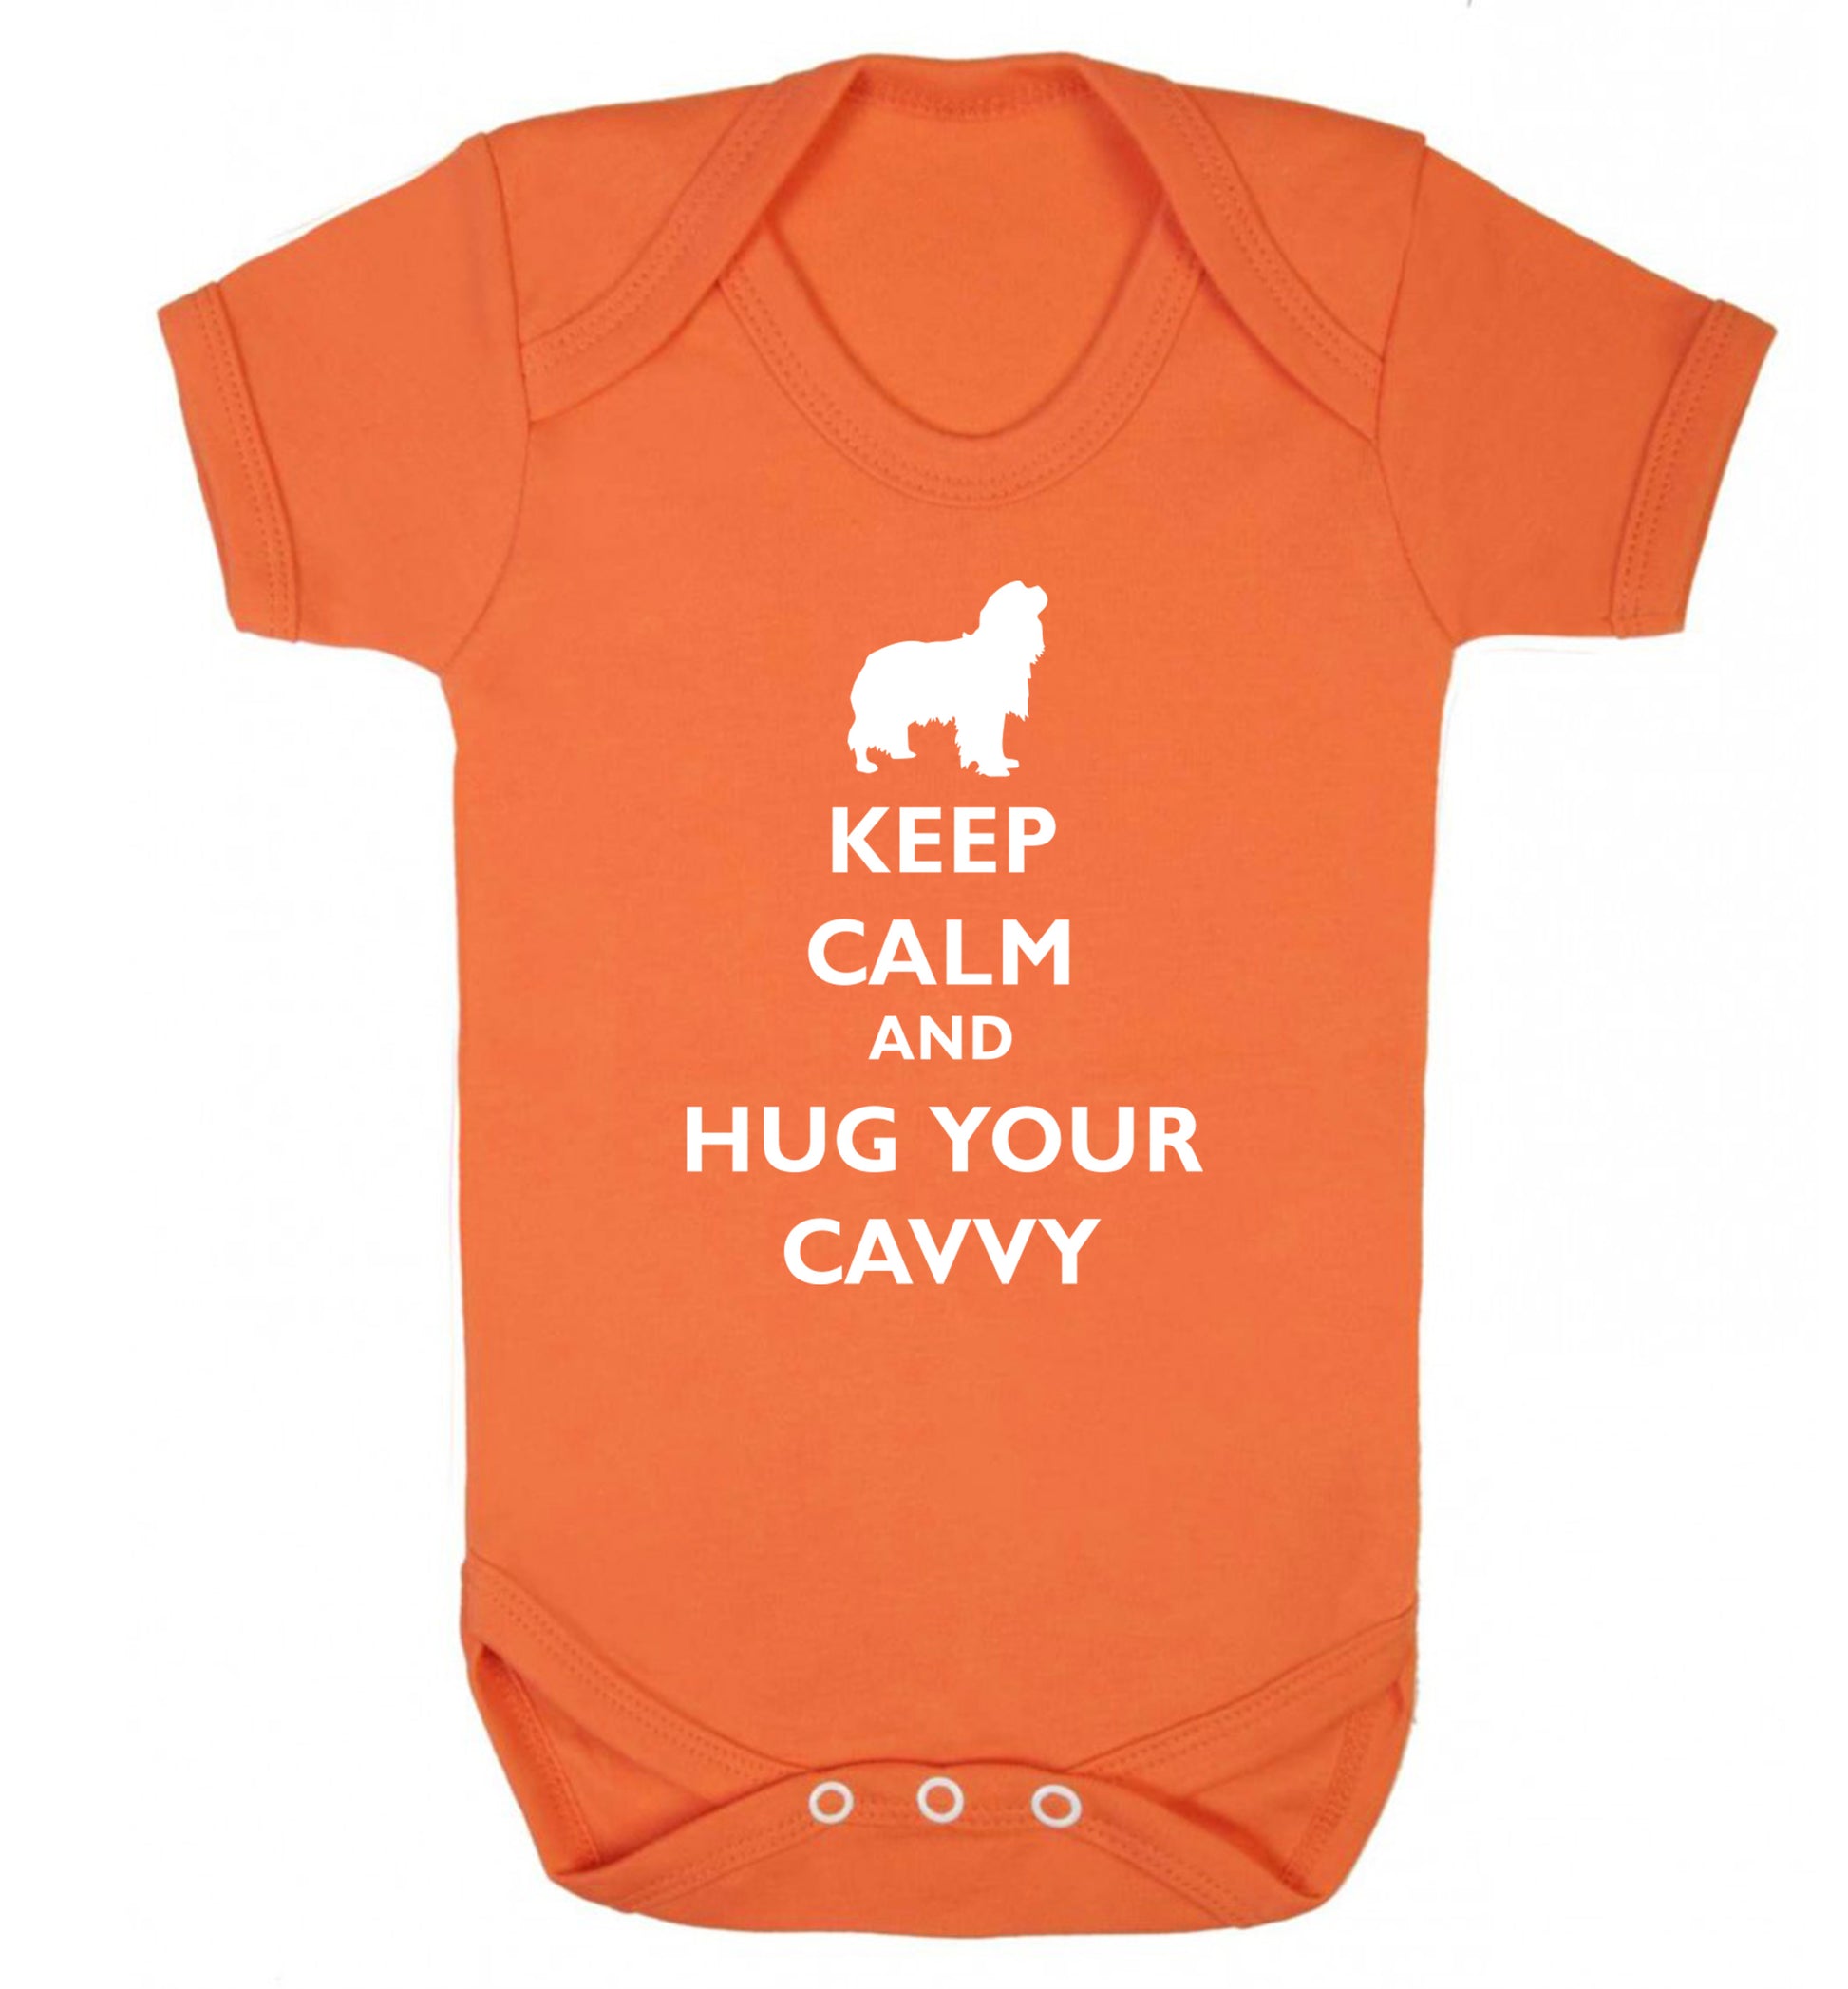 Keep calm and hug your cavvy Baby Vest orange 18-24 months